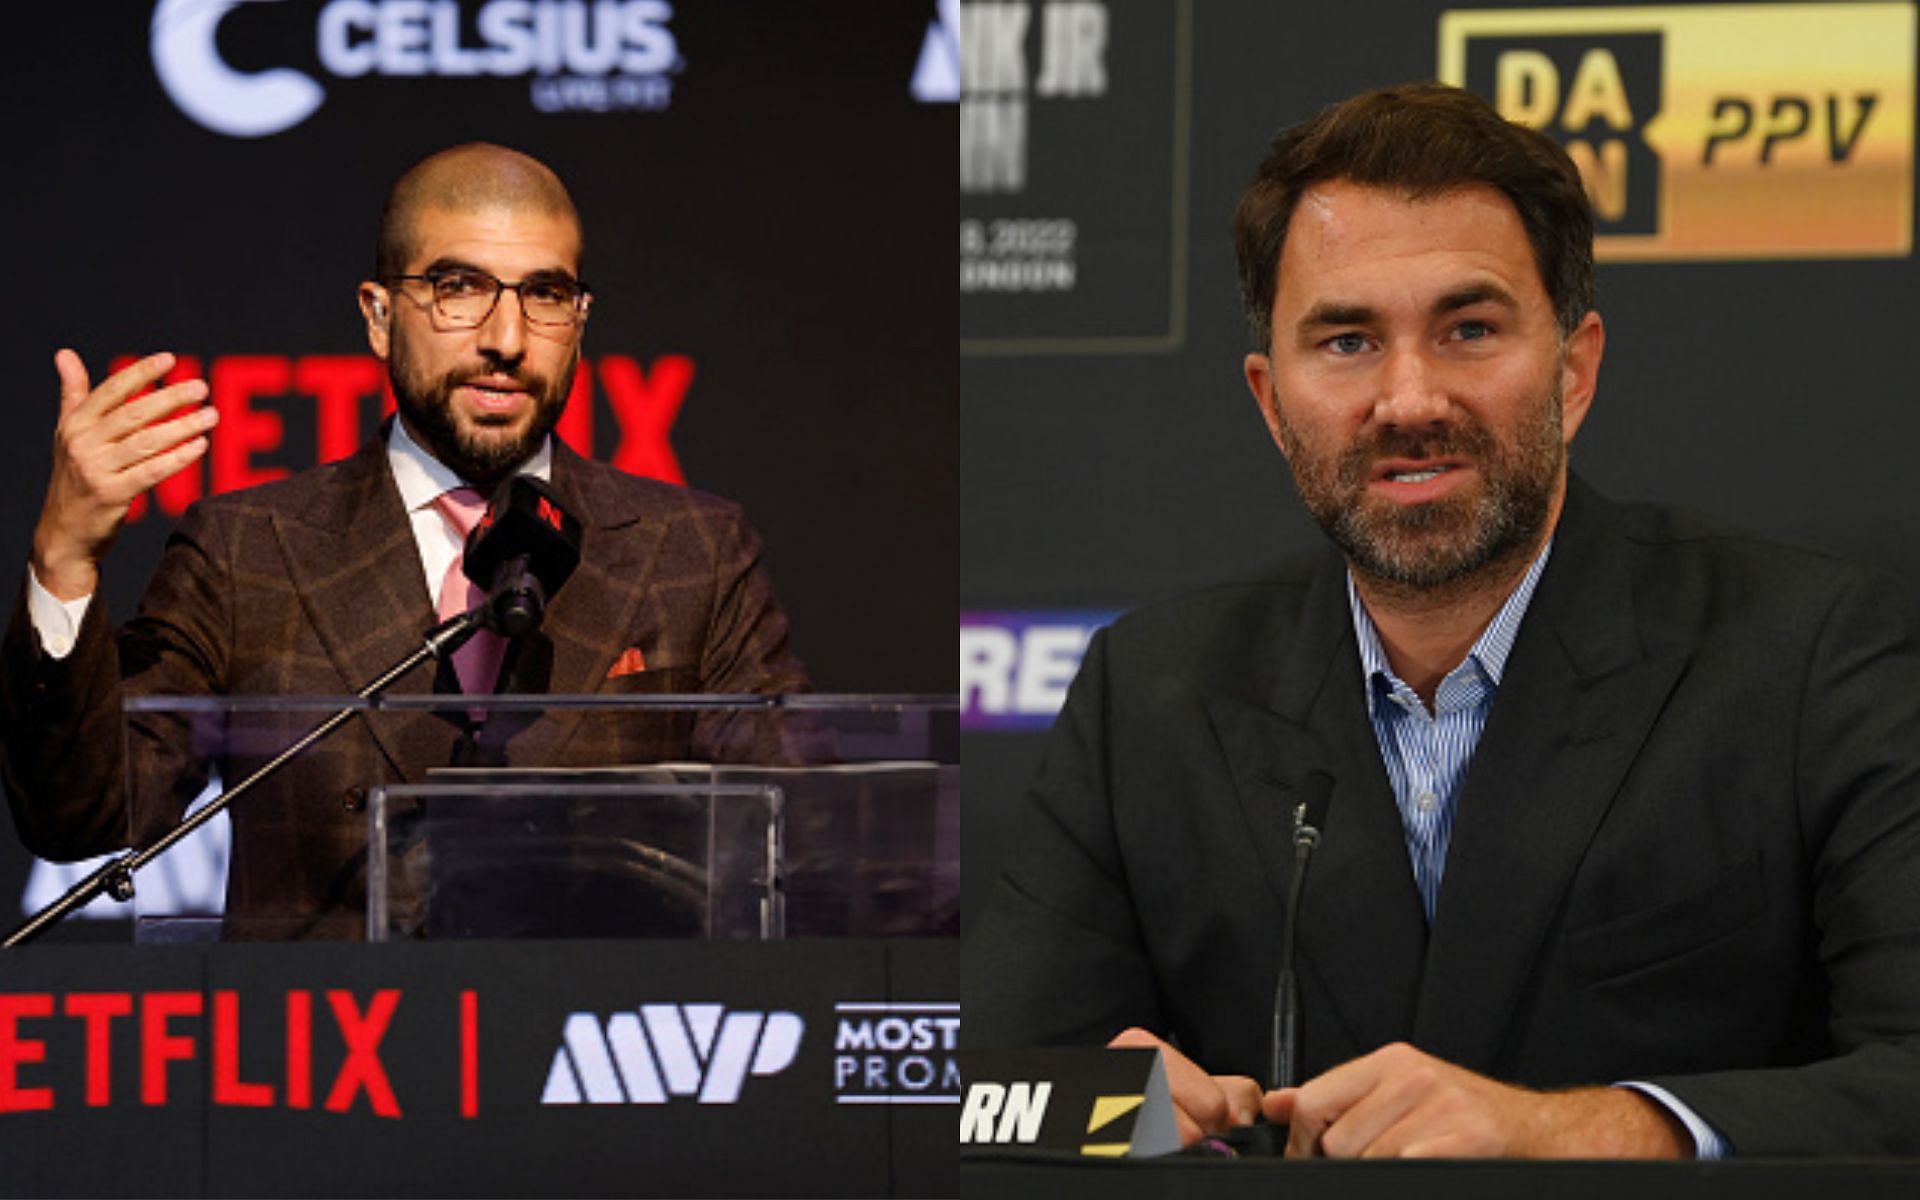 Ariel Helwani (left) shares why he is not a fan of boxing press conferences with Eddie Hearn (right) [Image credits: Getty Images]